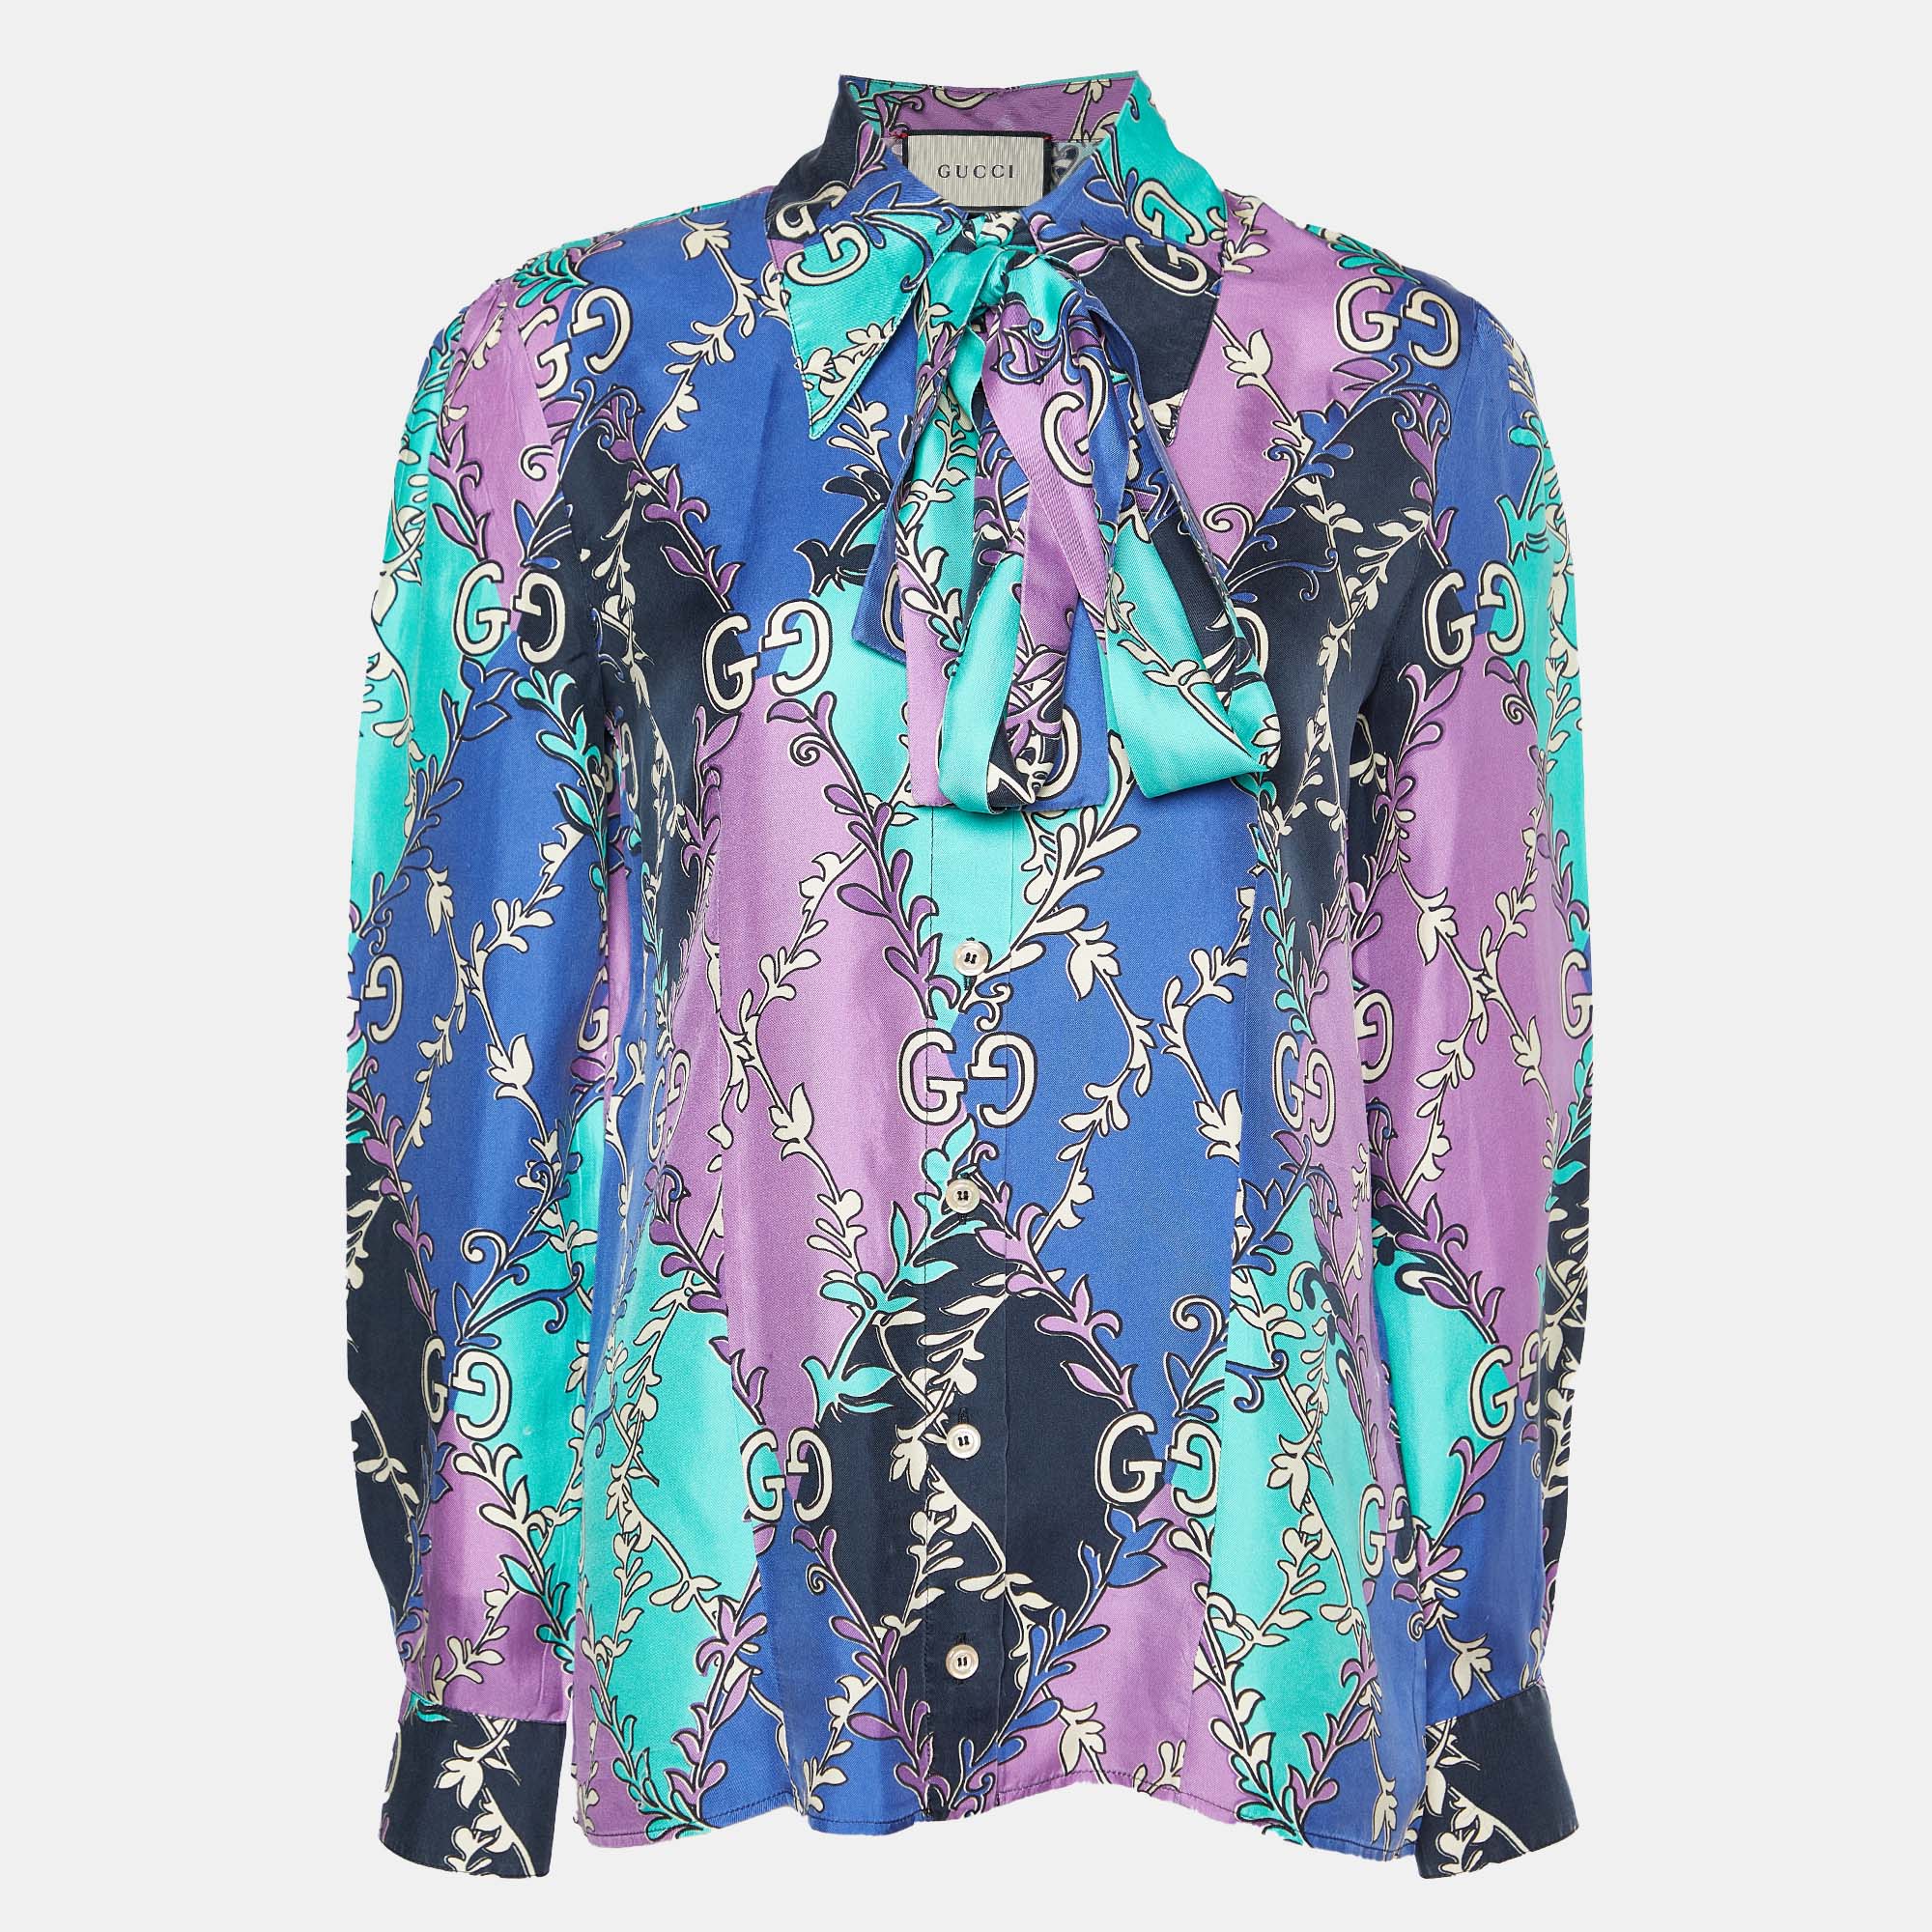 Gucci multicolor gg rhombus printed silk buttoned up shirt s